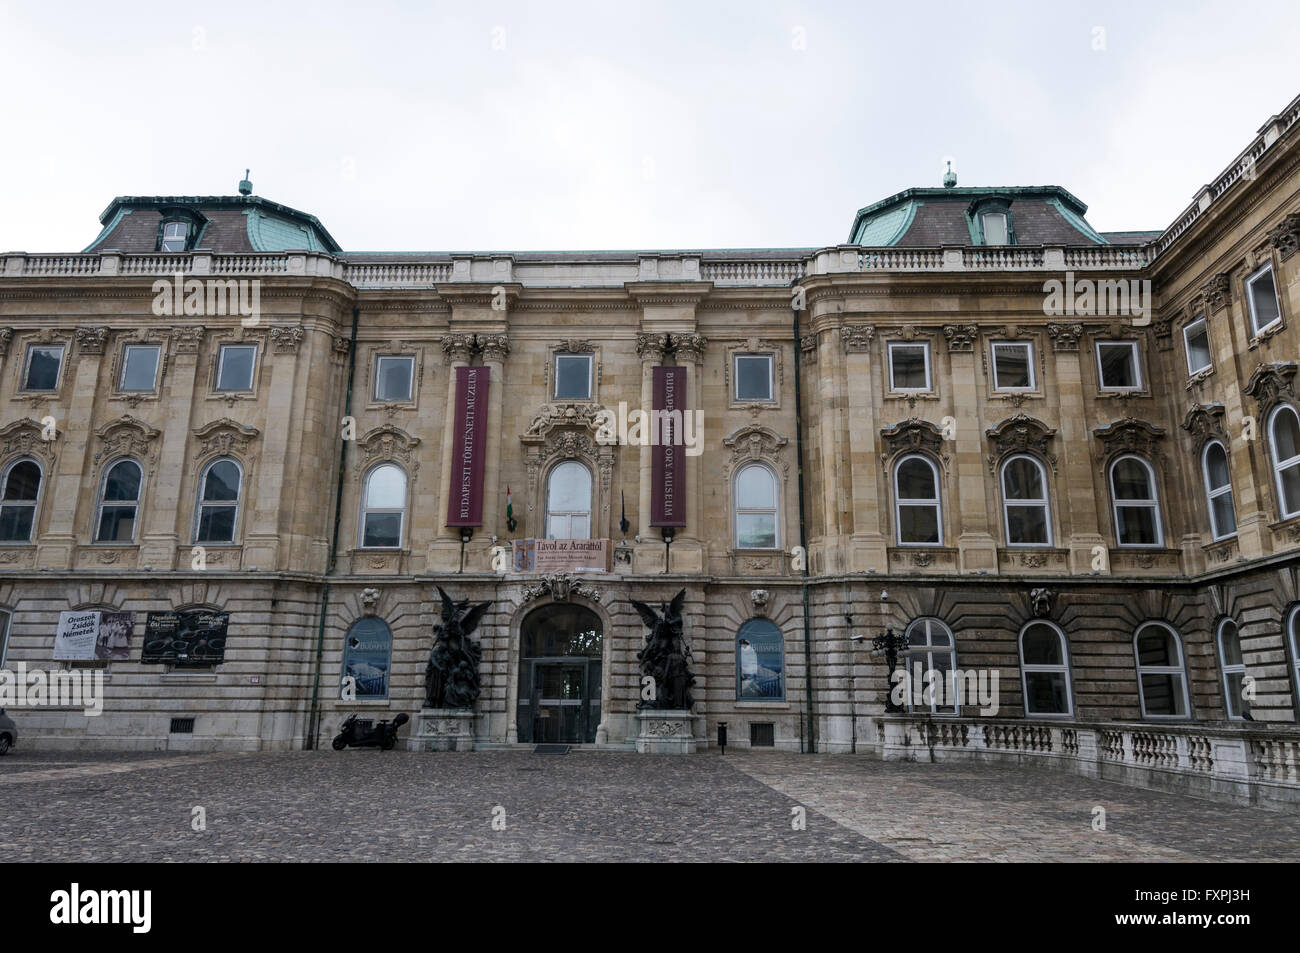 The National Museum of Budapest on Buda Castle Hill in Budapest, Hungary Stock Photo